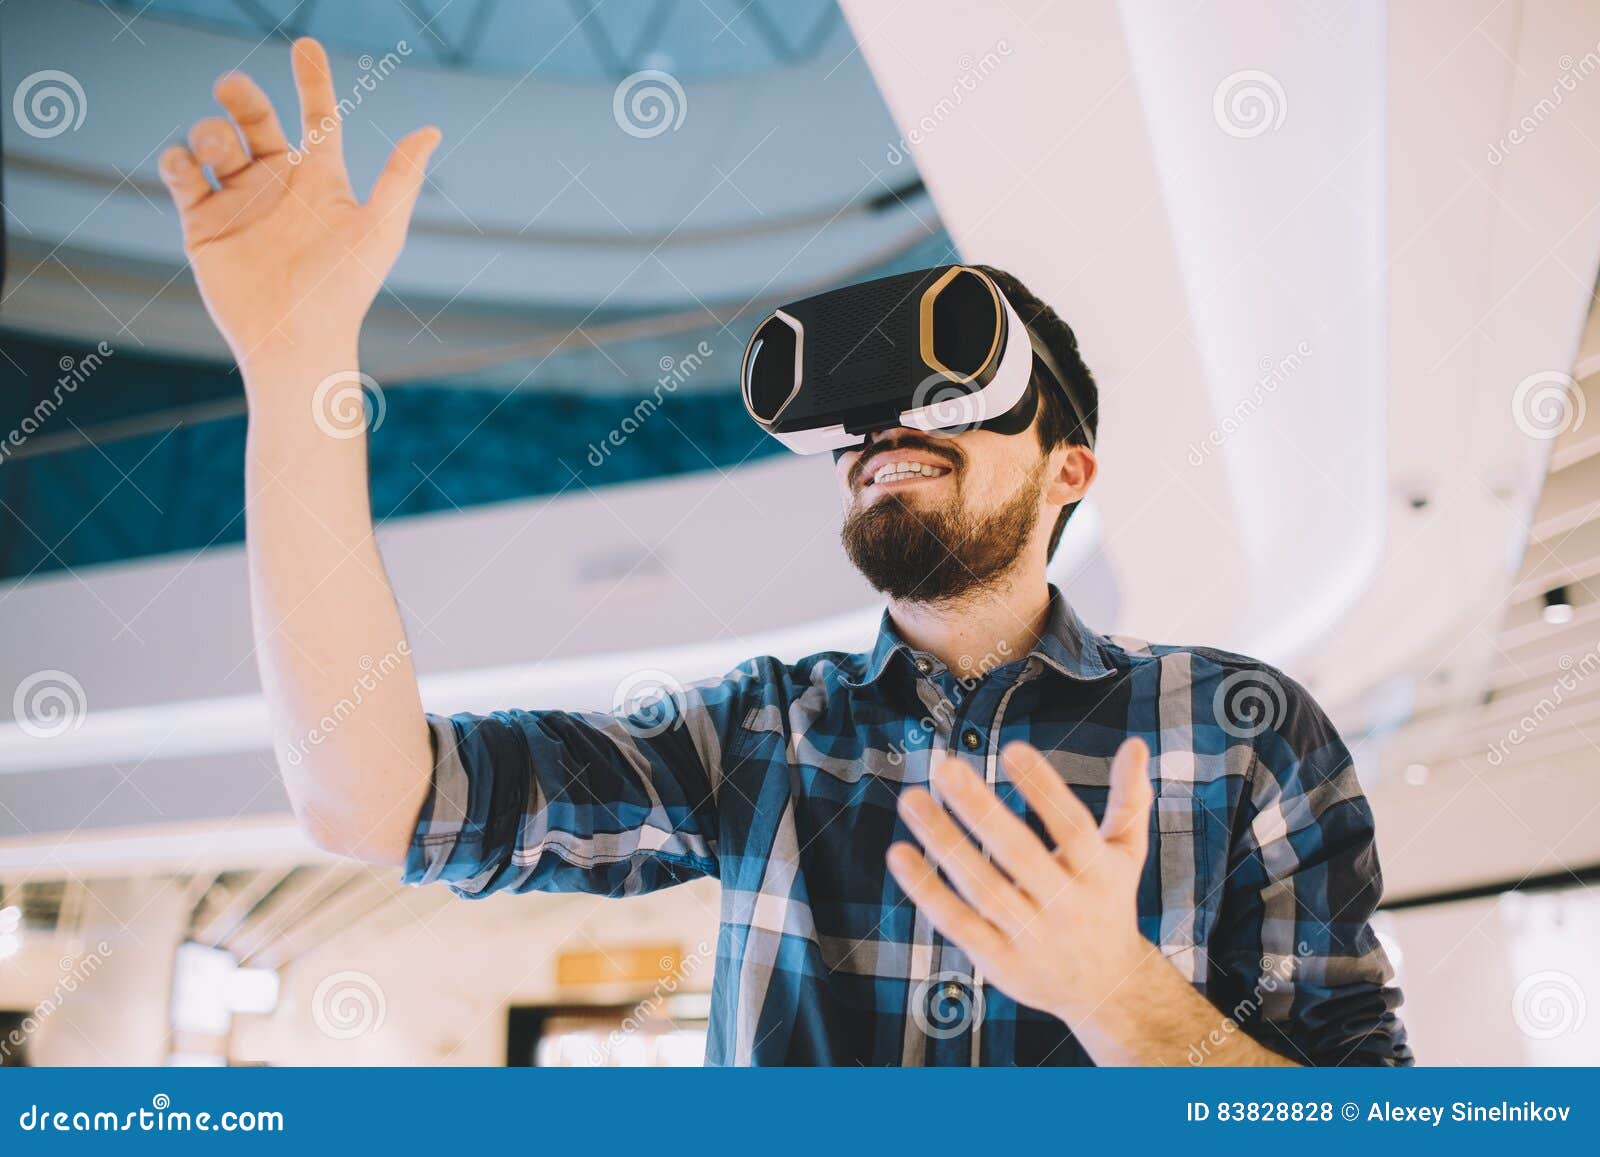 Young Man Trying Vr Goggles in the Shopping Centre Stock Photo - Image ...